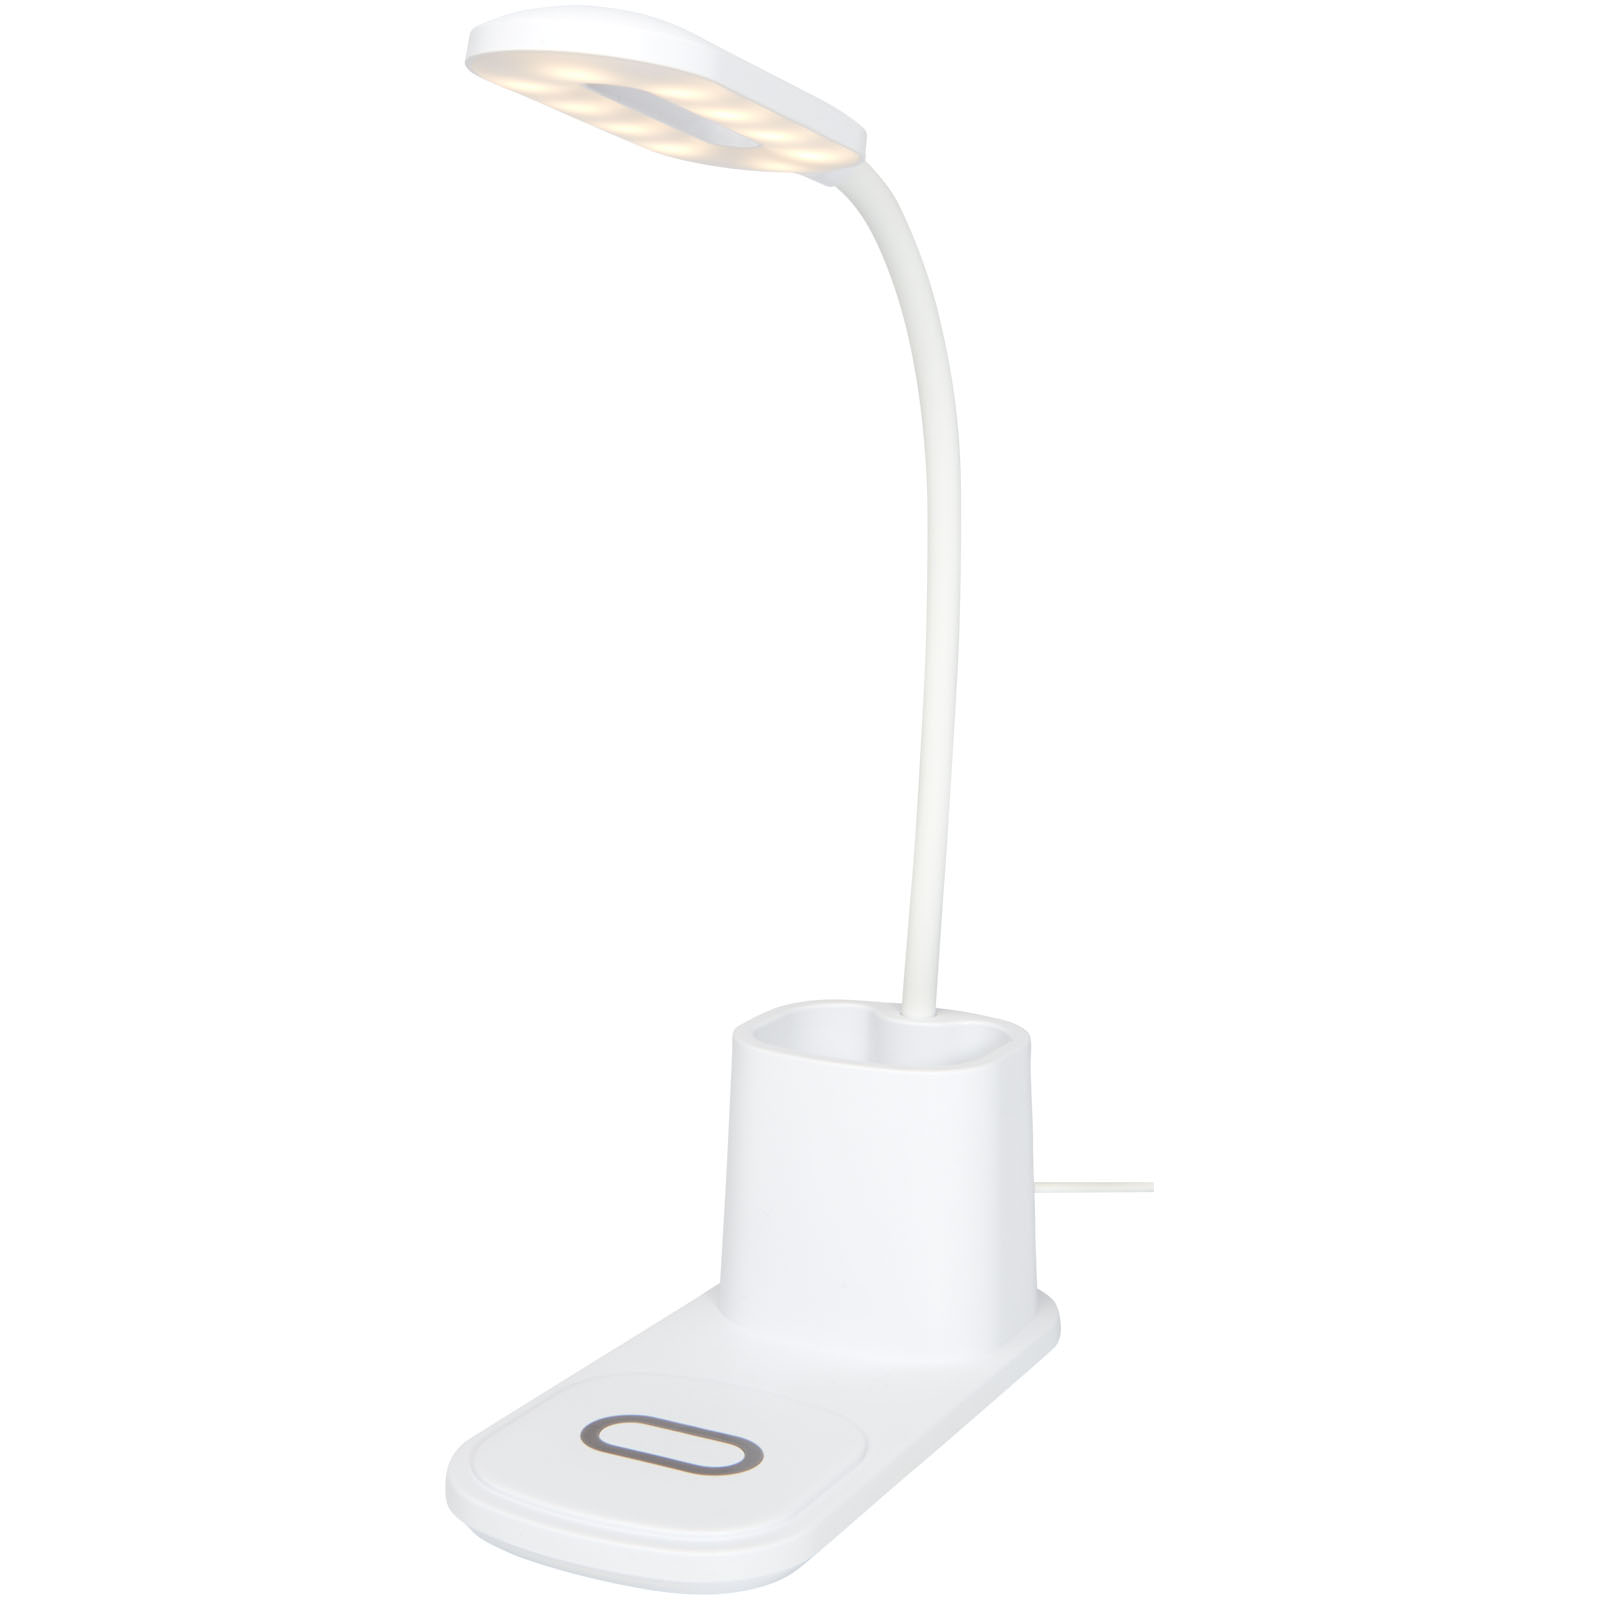 Technology - Bright desk lamp and organizer with wireless charger